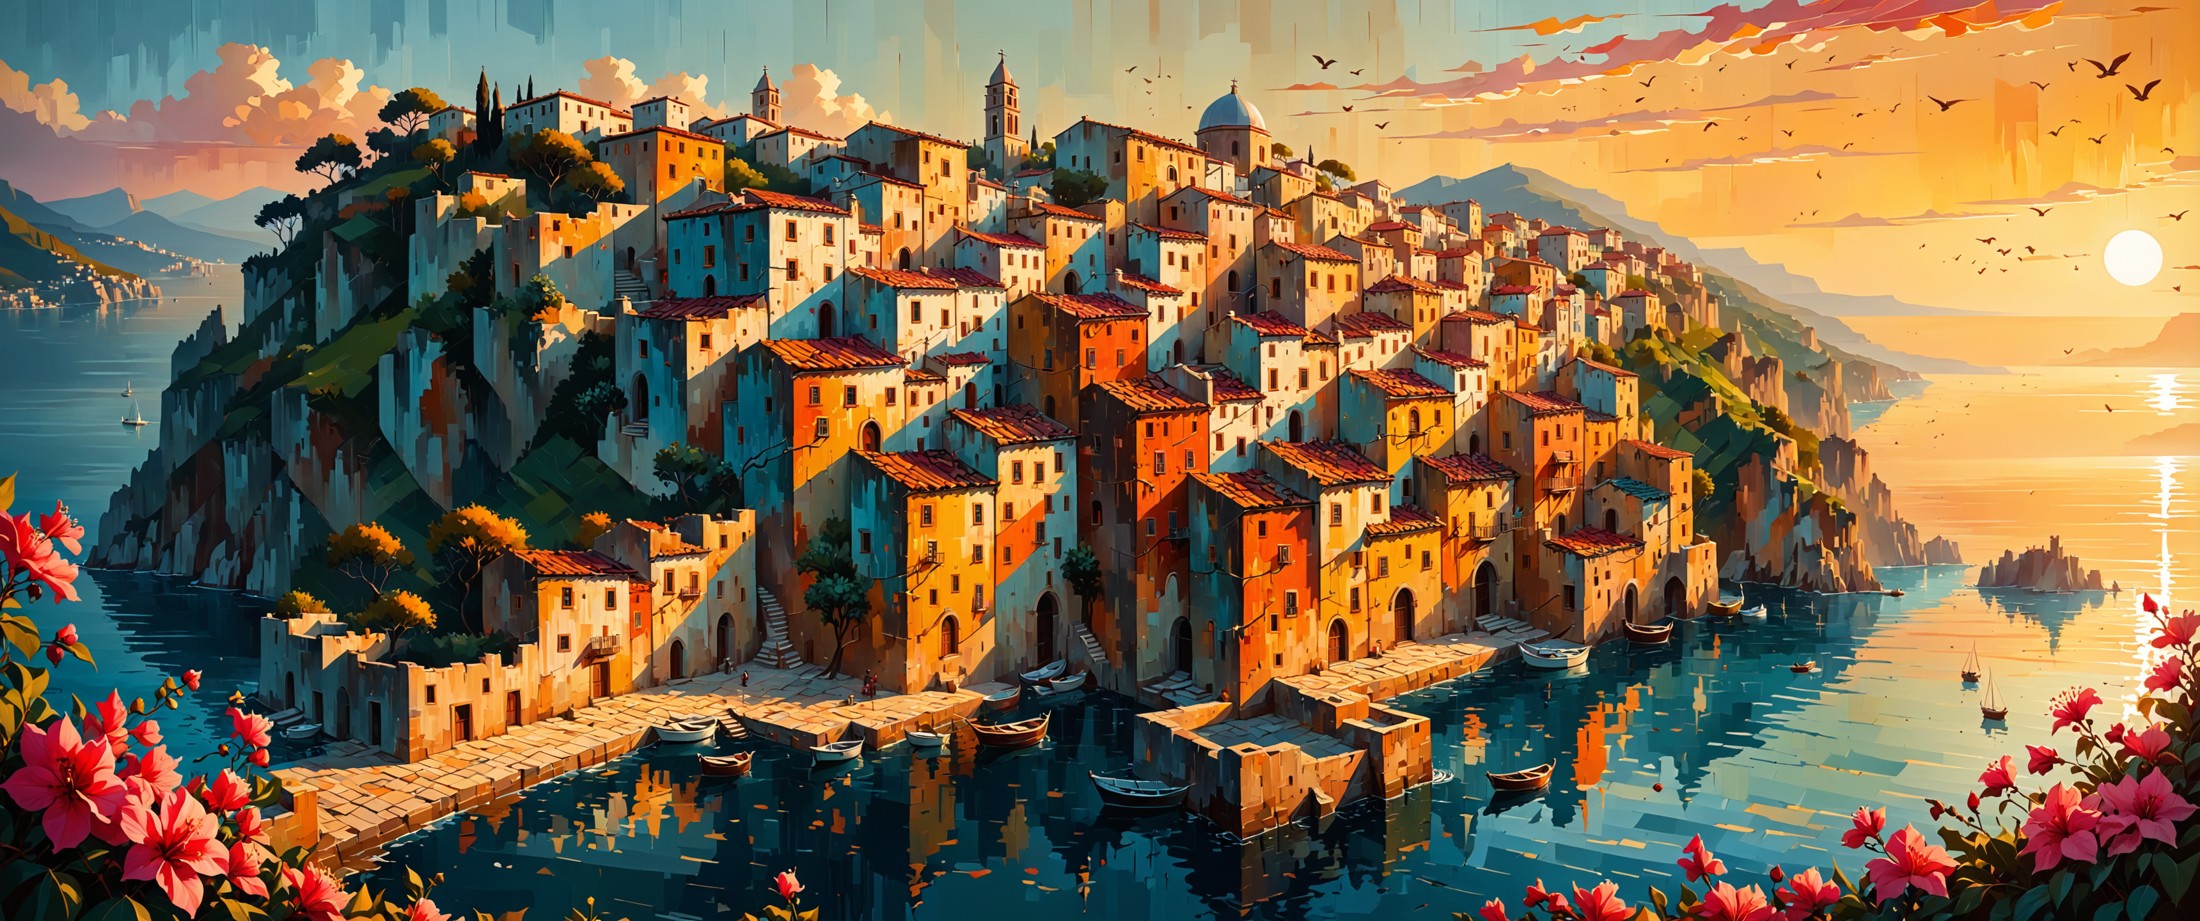 This image depicts a breathtaking, romanticized view of a Mediterranean coastal town, likely inspired by locations such as...